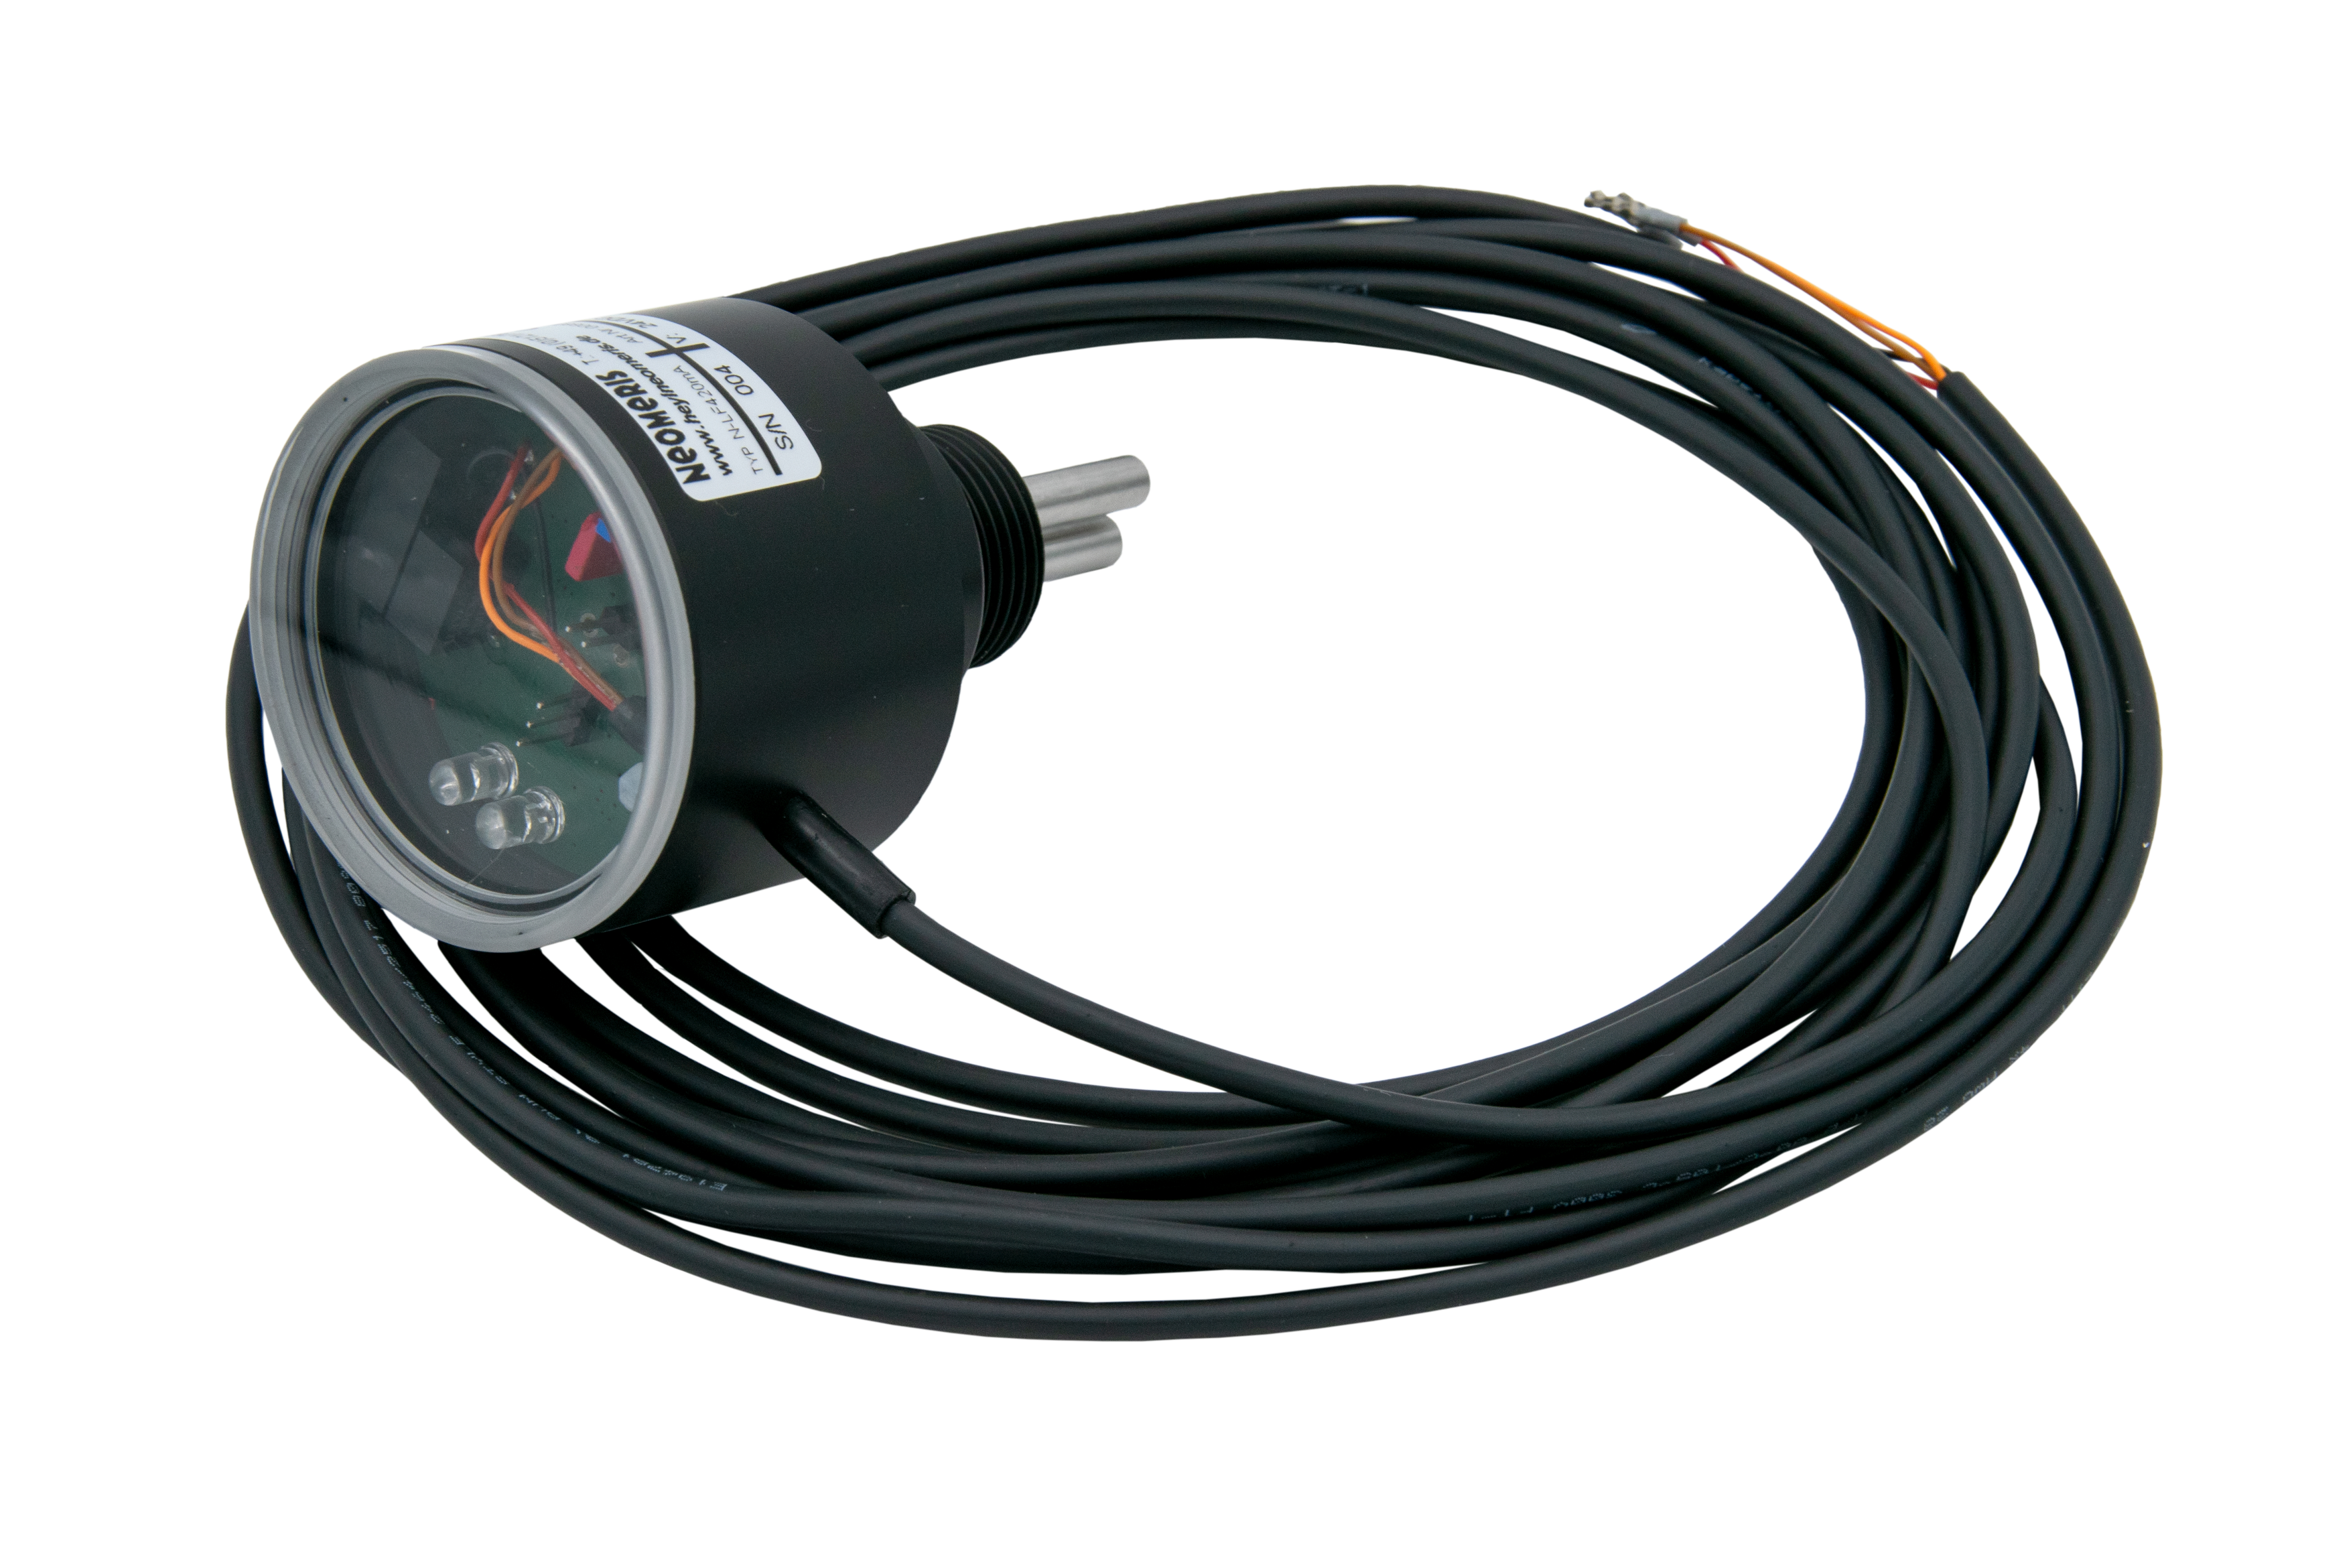 N-LF420 0-50µS conductivity meter with 4-20mA output, LED display and 3/4 inch screw-in thread